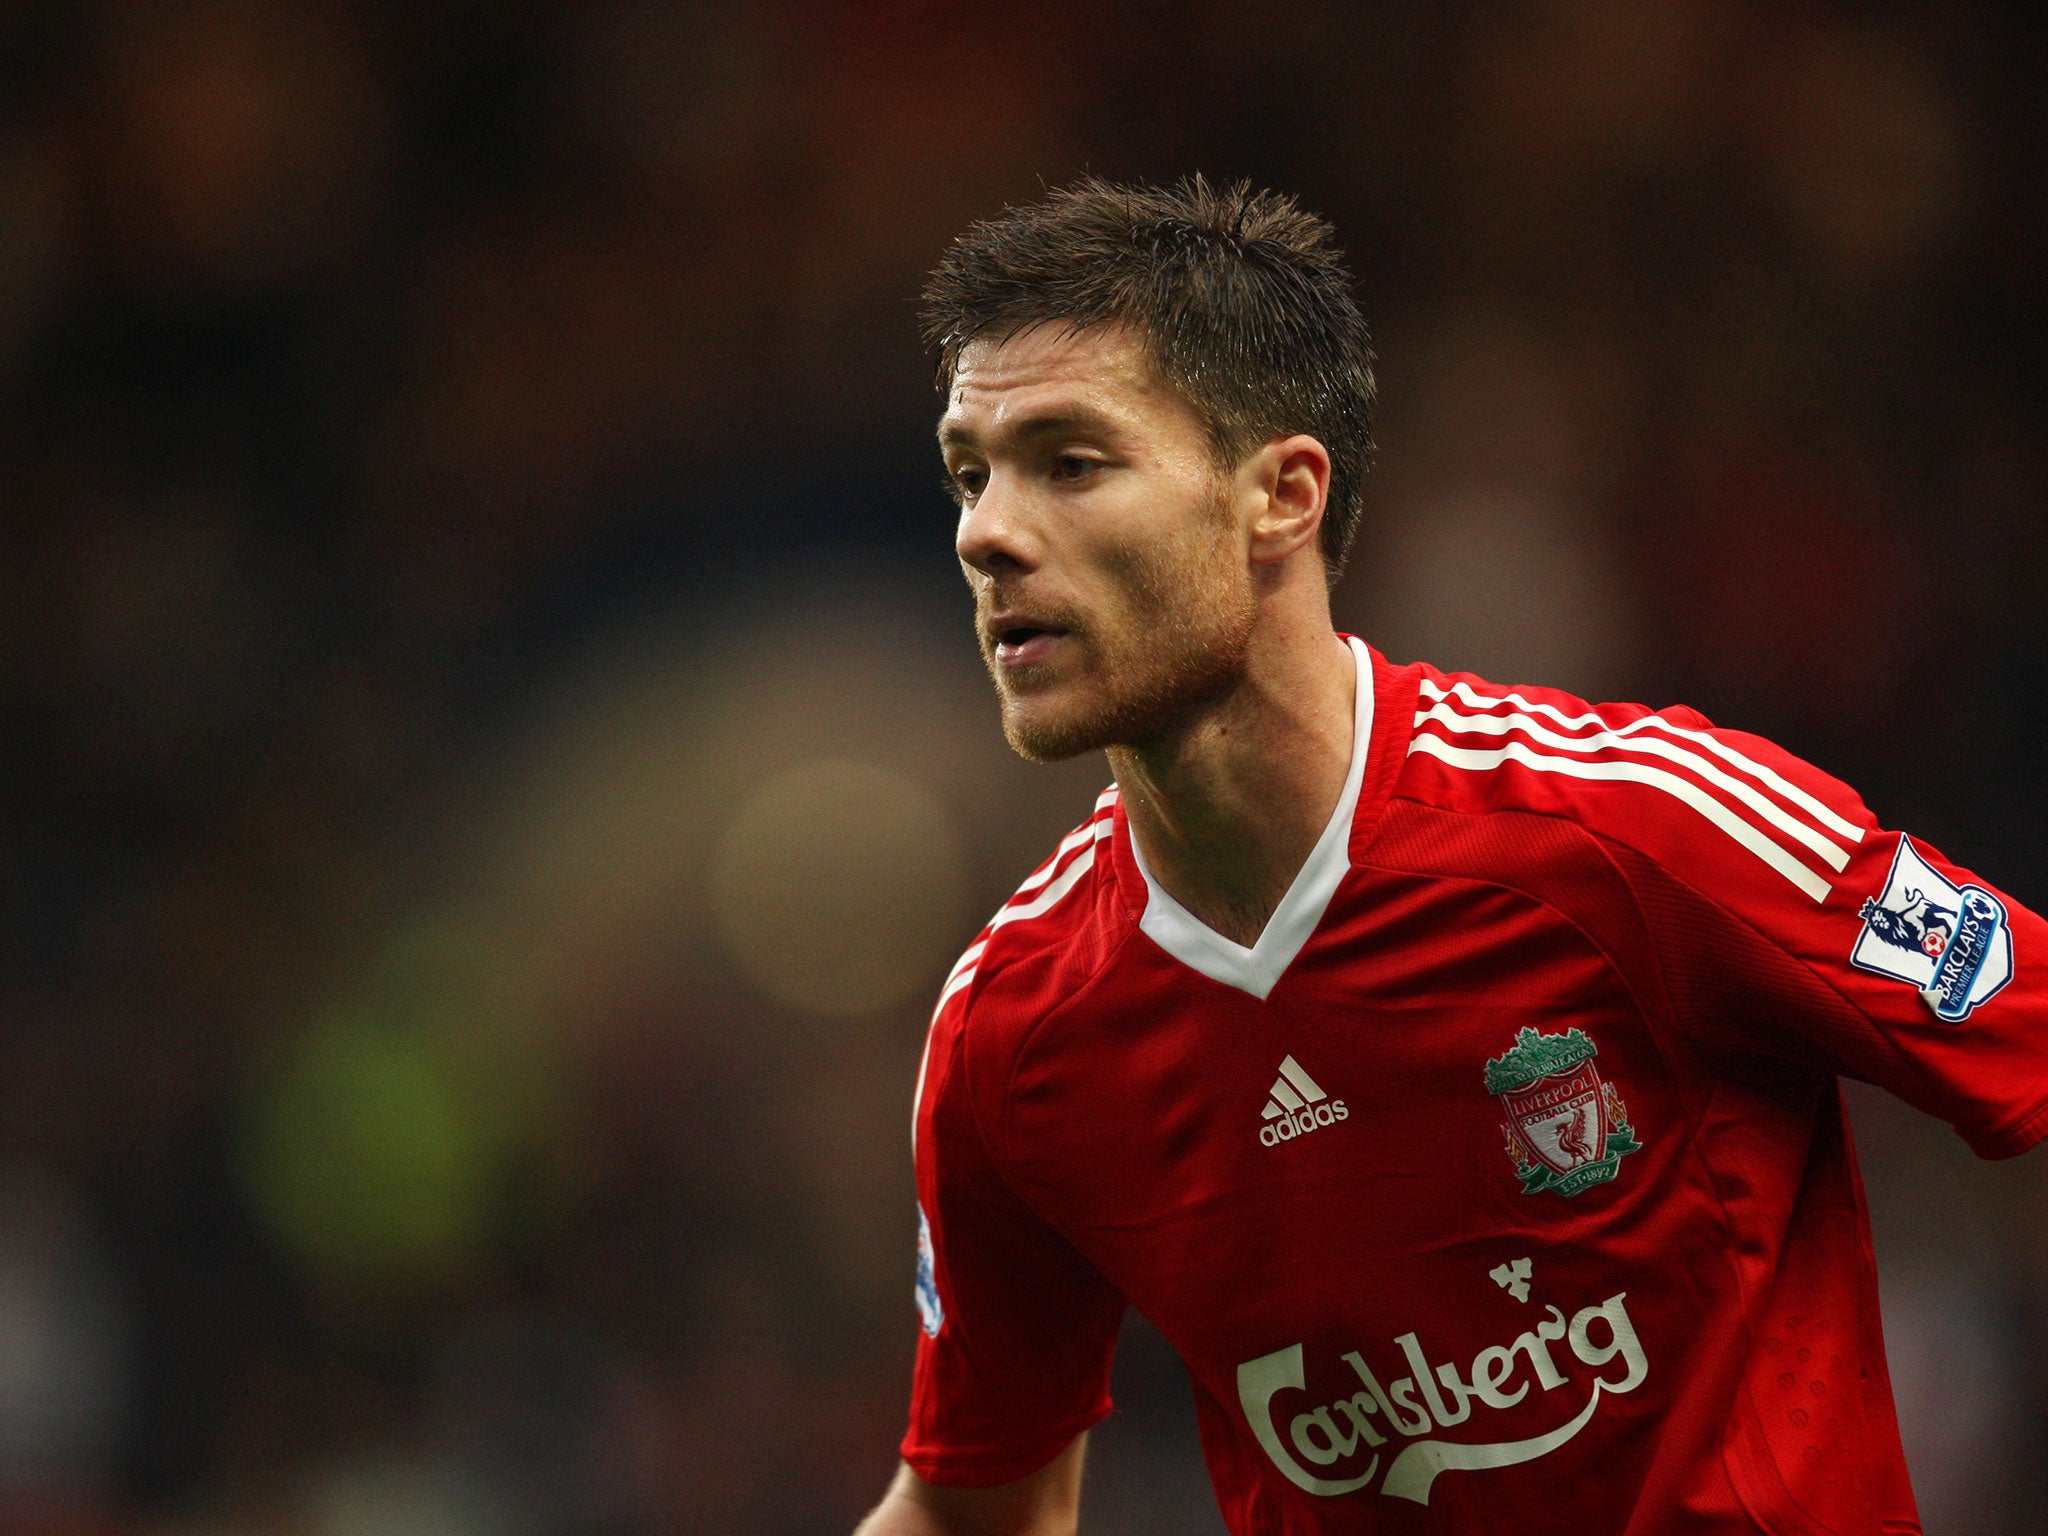 Xabi Alonso during his Liverpool playing days